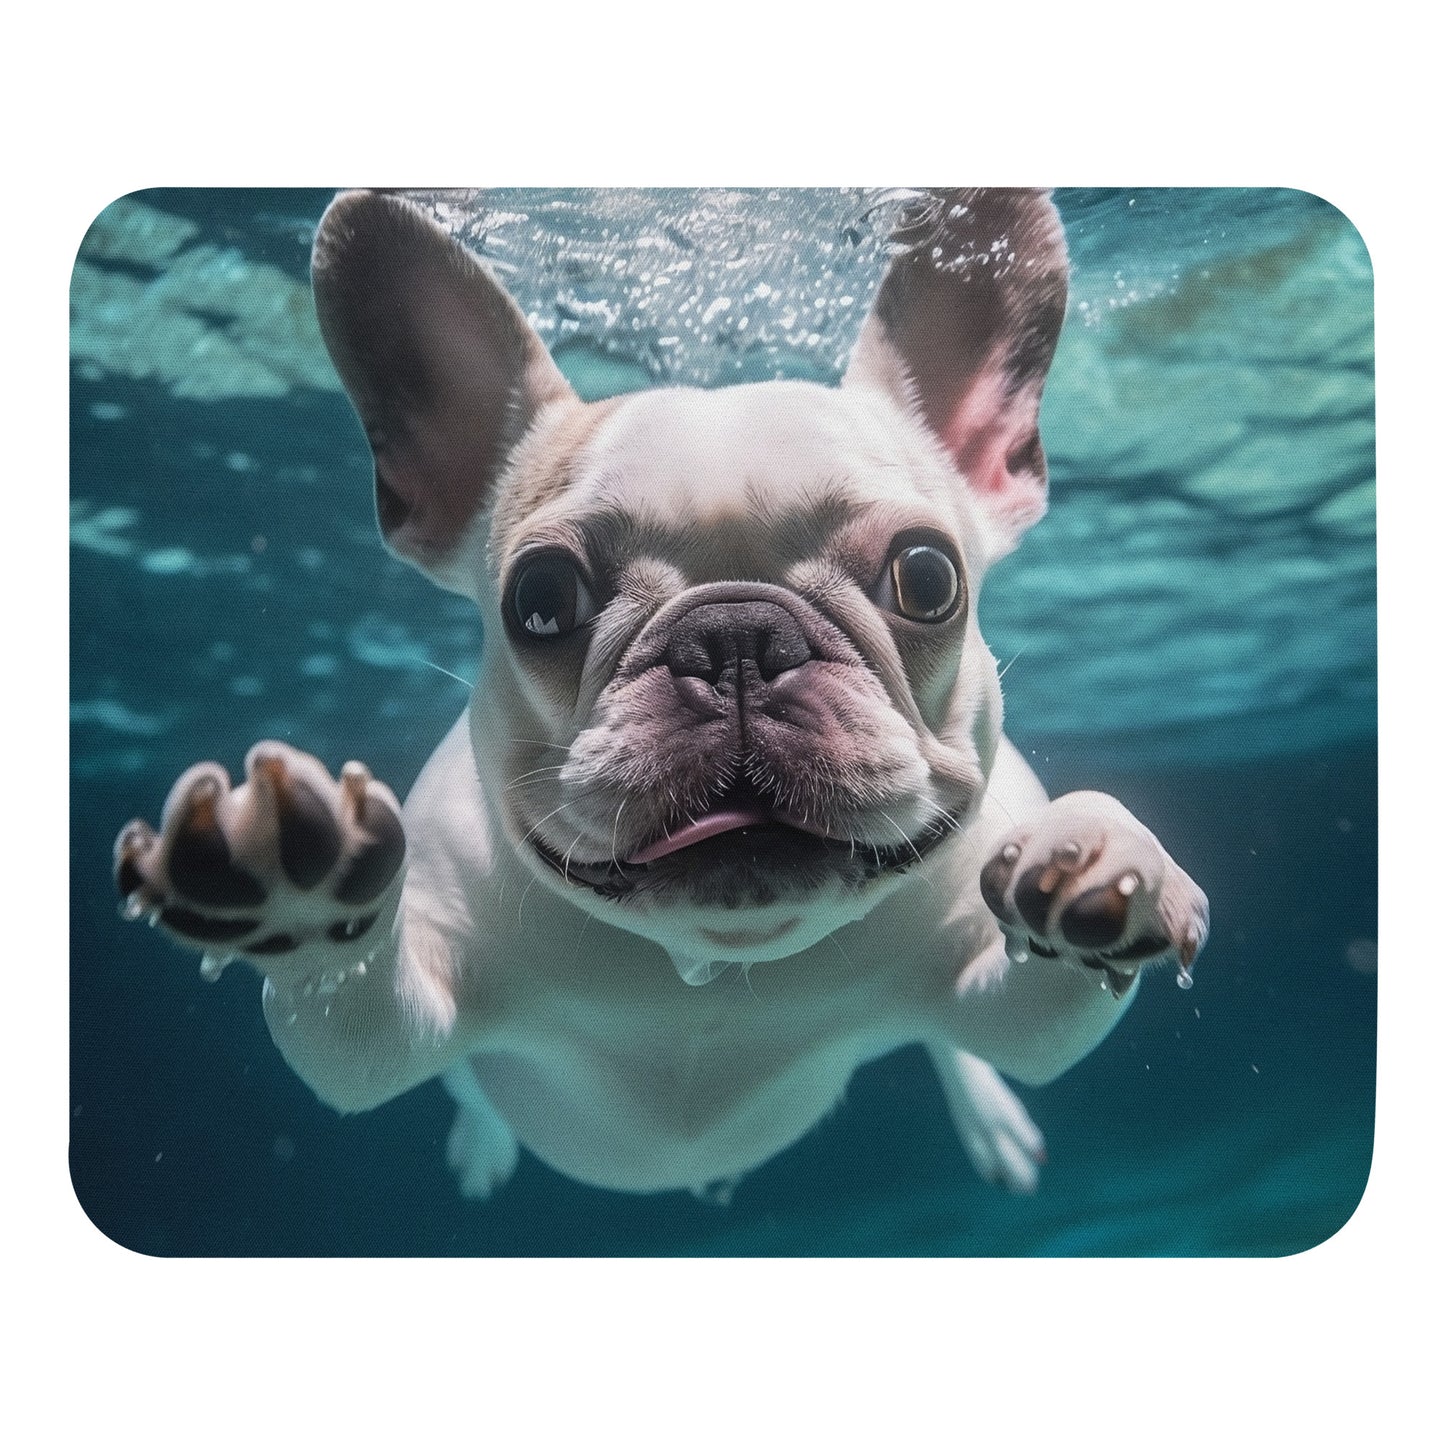 Mouse pad "Underwater" Frenchie